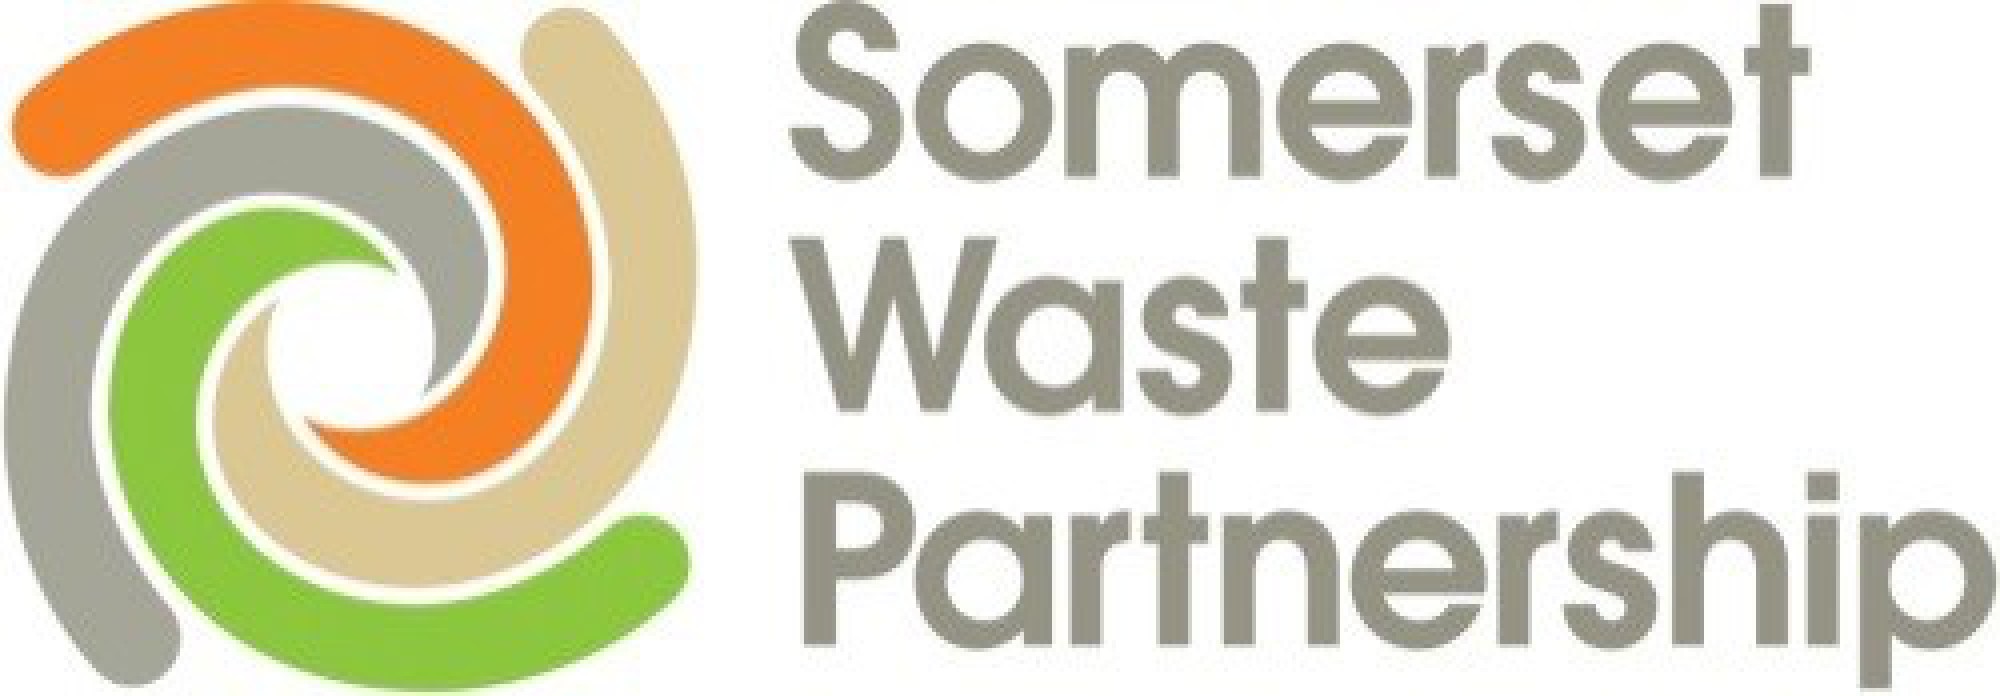 February 2023 Briefing from Somerset Waste Partnership